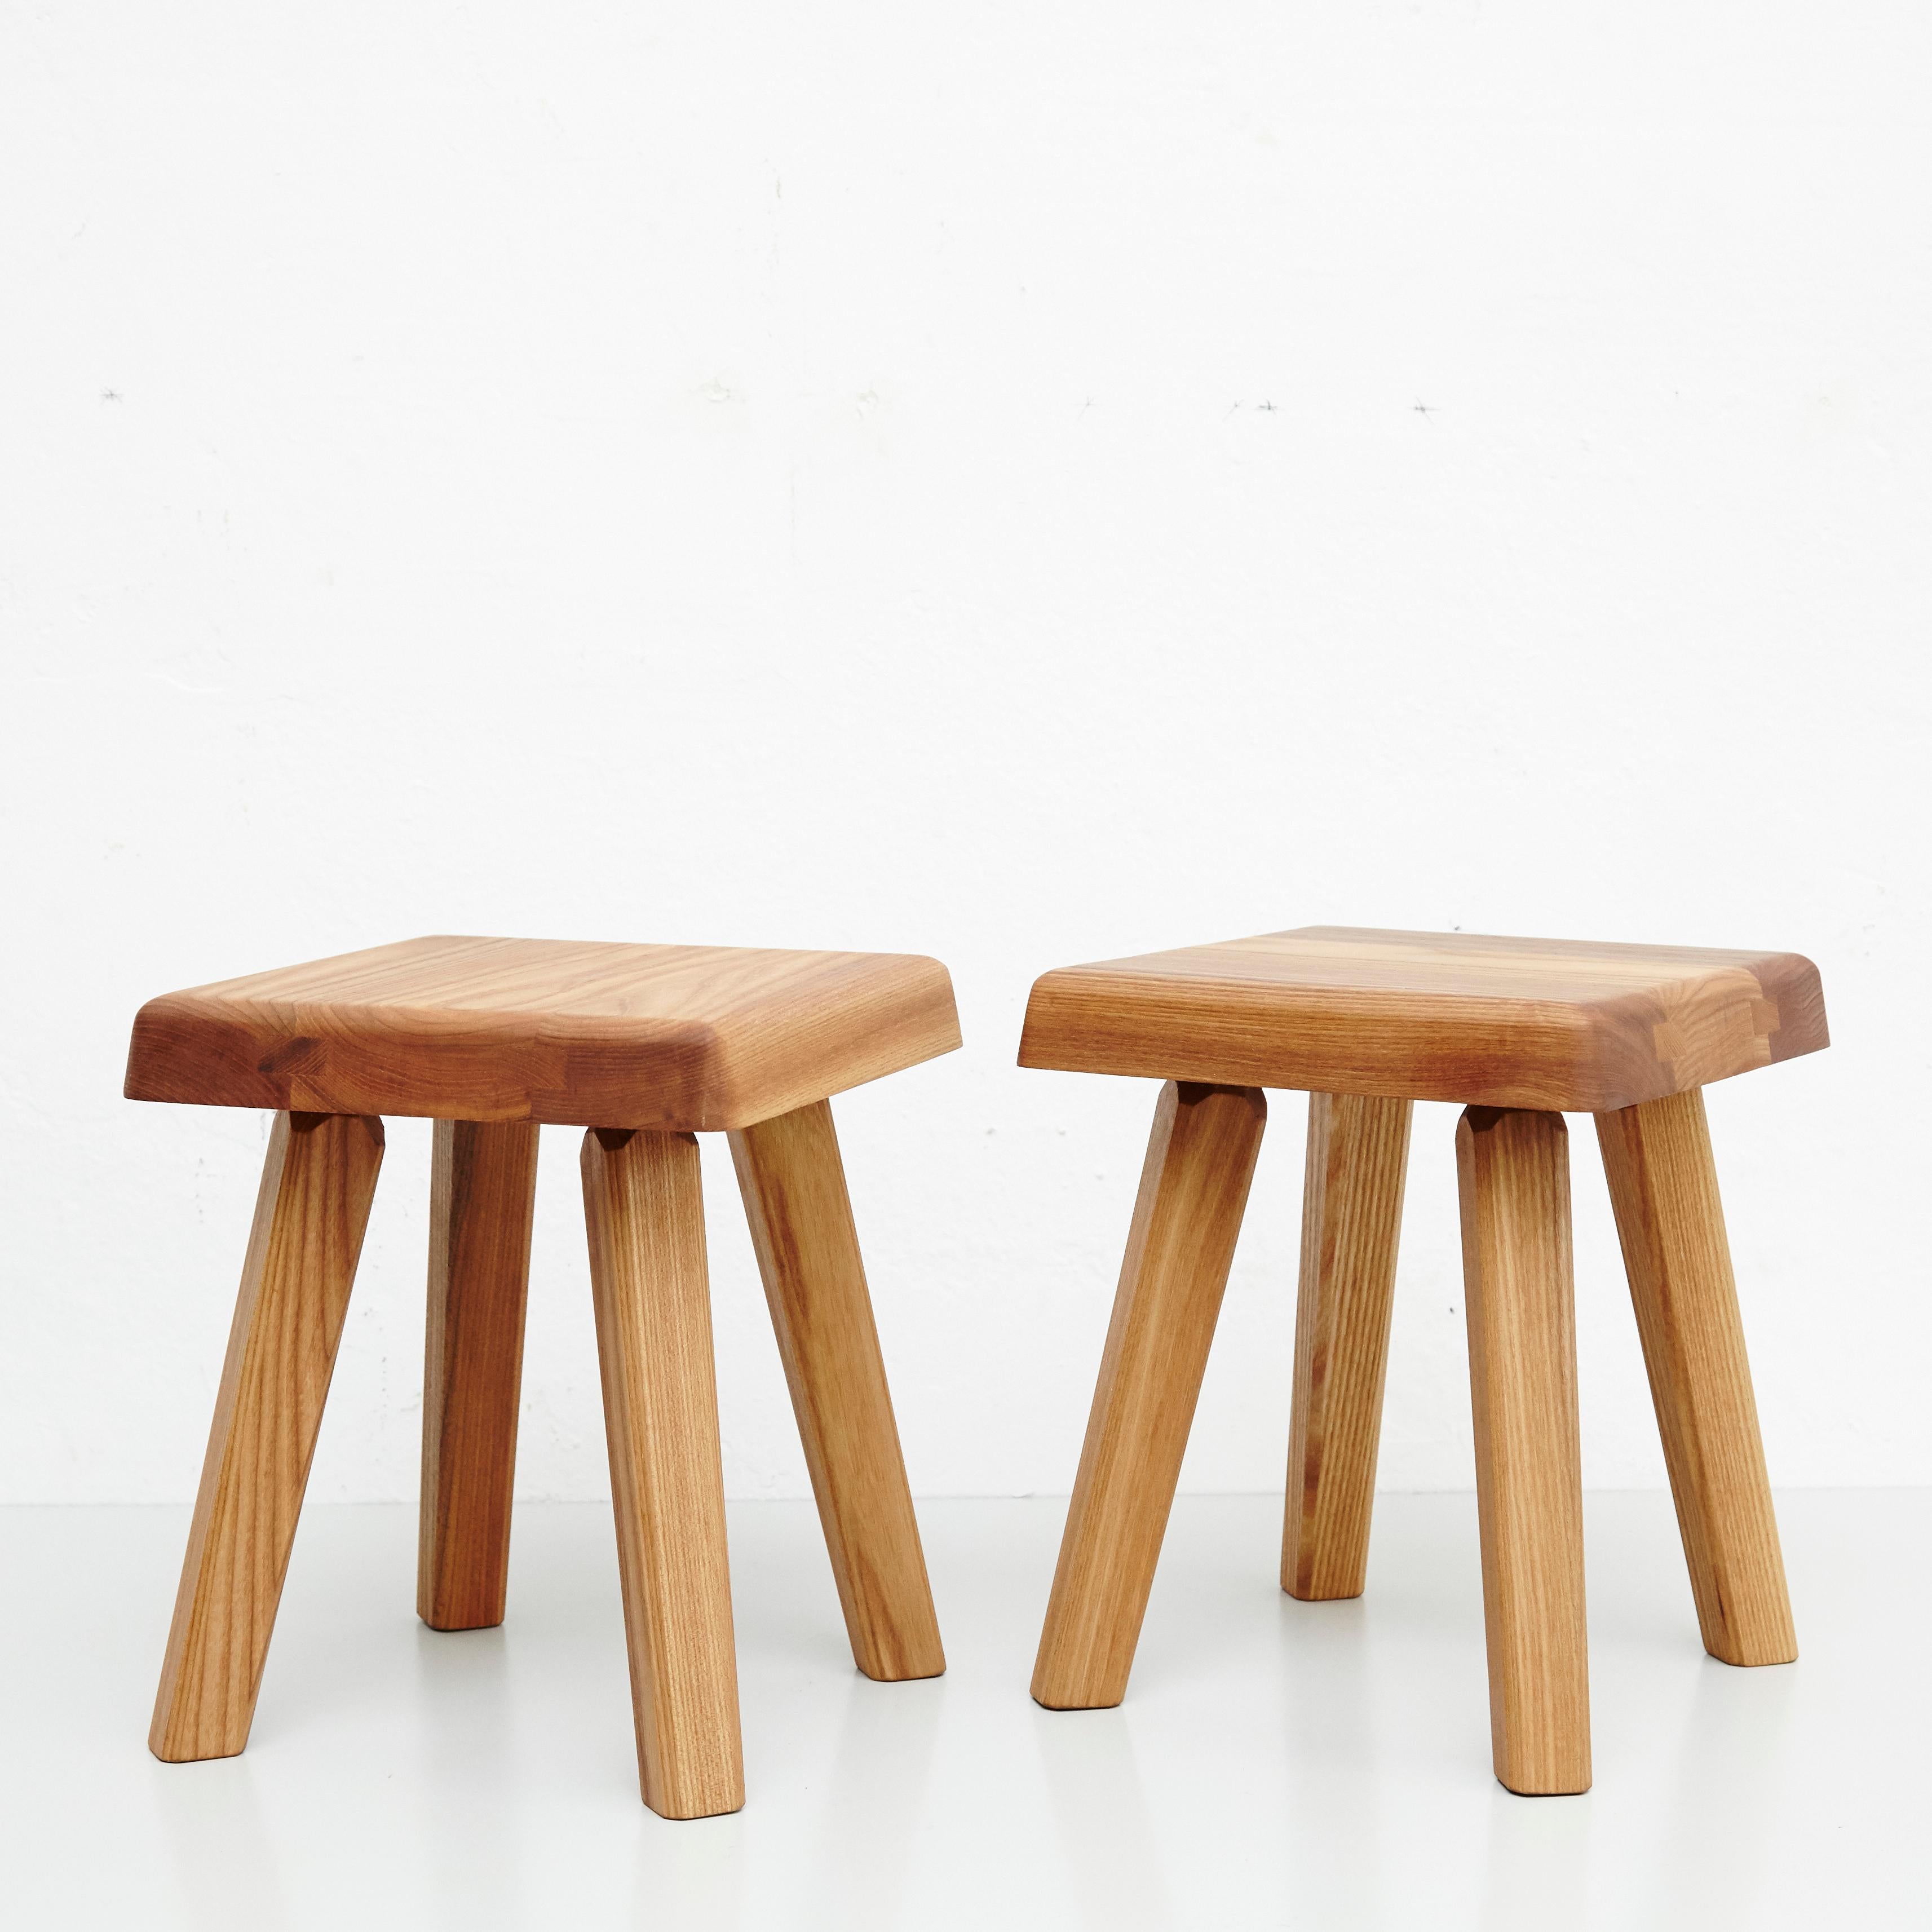 Pair of stool designed by Pierre Chapo in 1960s.
Manufactured by Creation Chapo in France in 2020.

Solid elmwood.

In good original condition, with minor wear consistent with age and use, preserving a beautiful patina.

Pierre Chapo is born